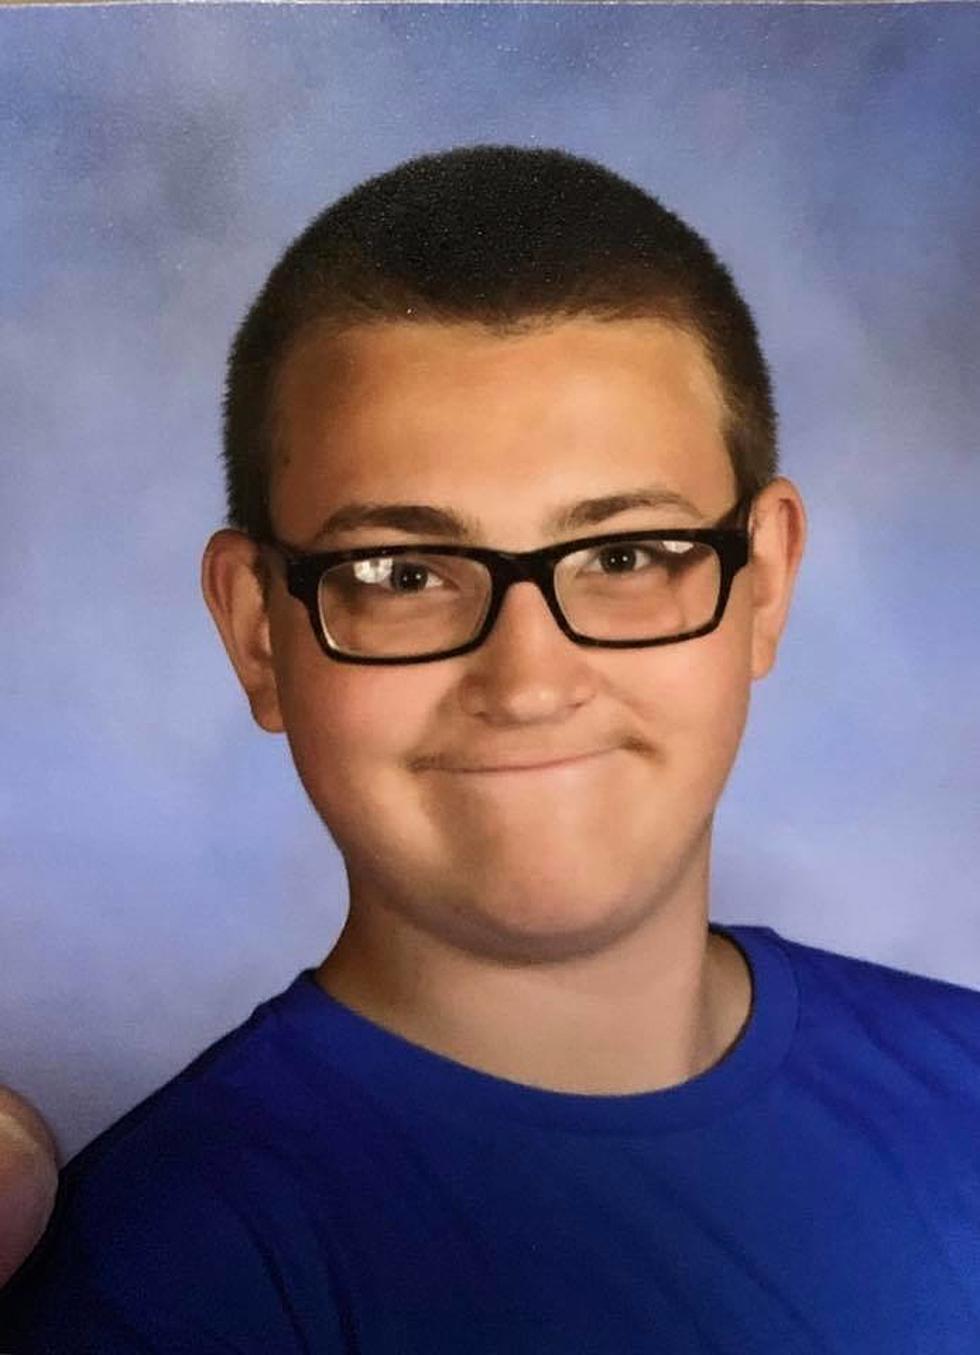 Police Searching for Missing Twin Falls Teen